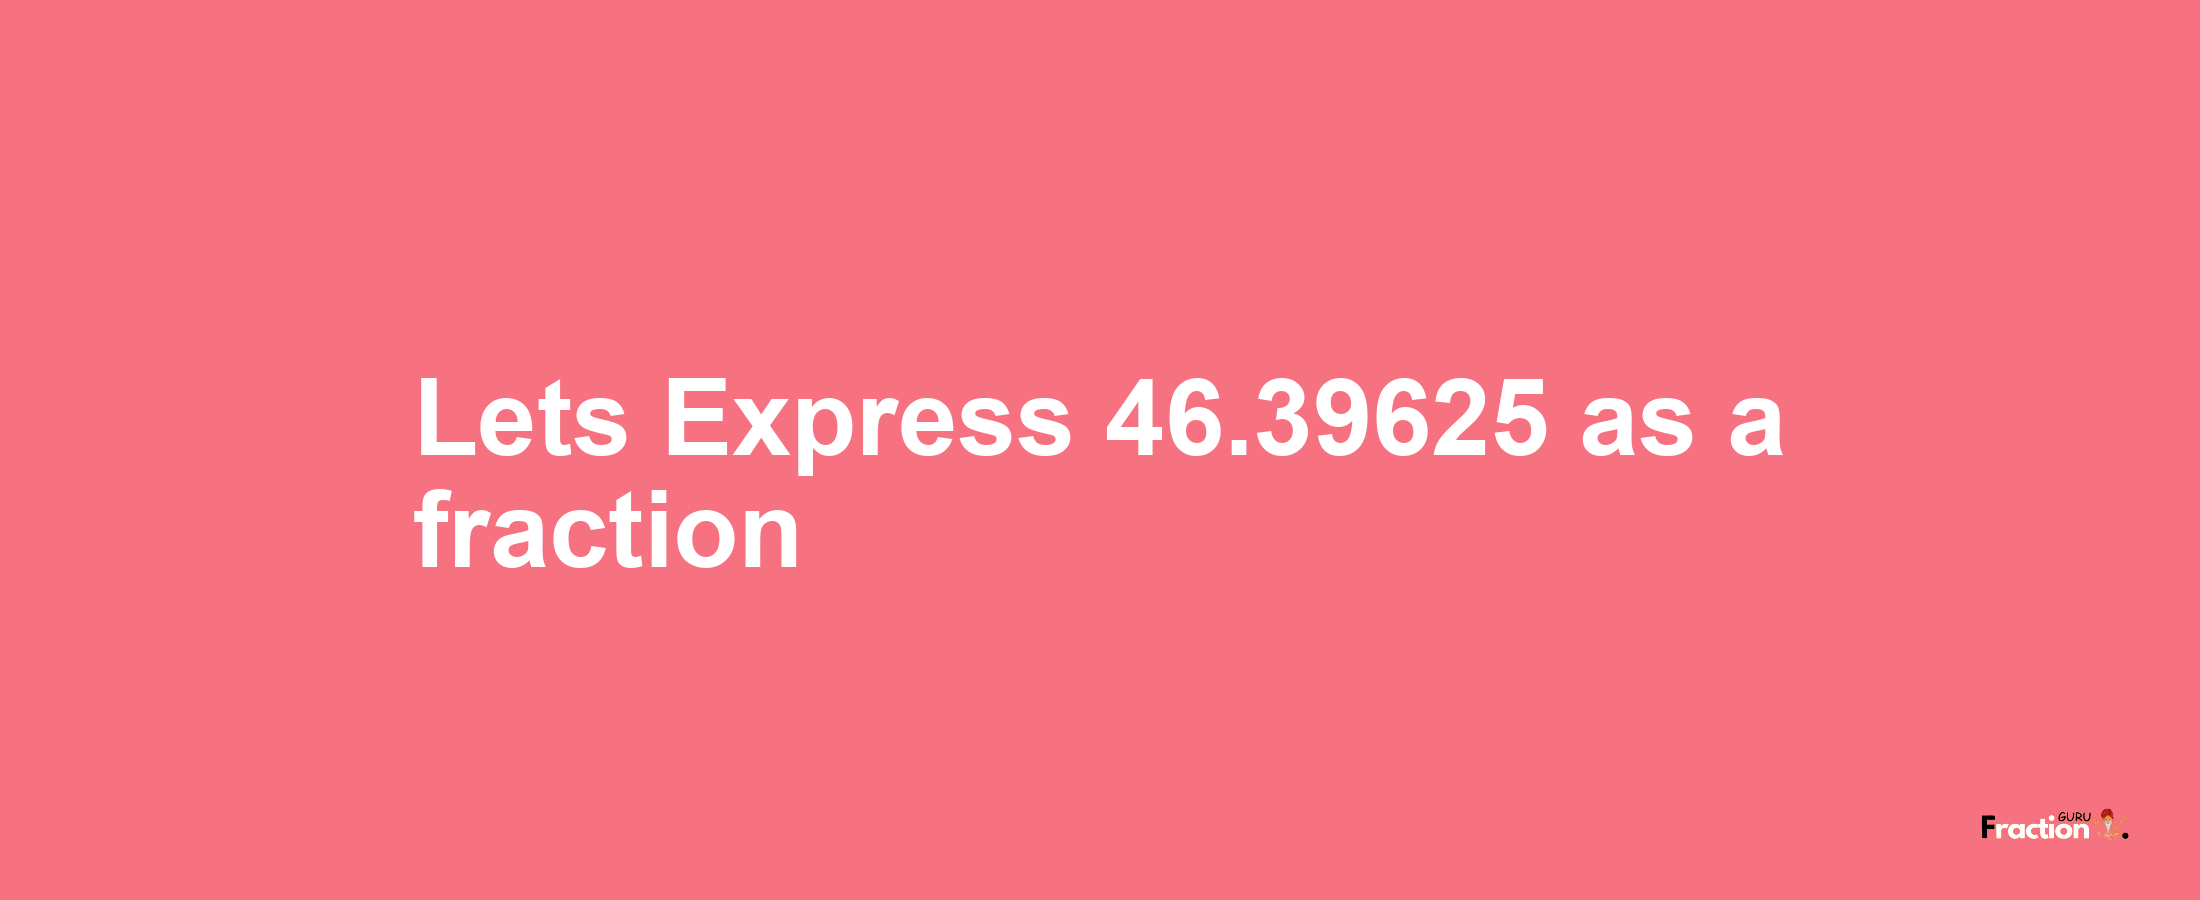 Lets Express 46.39625 as afraction